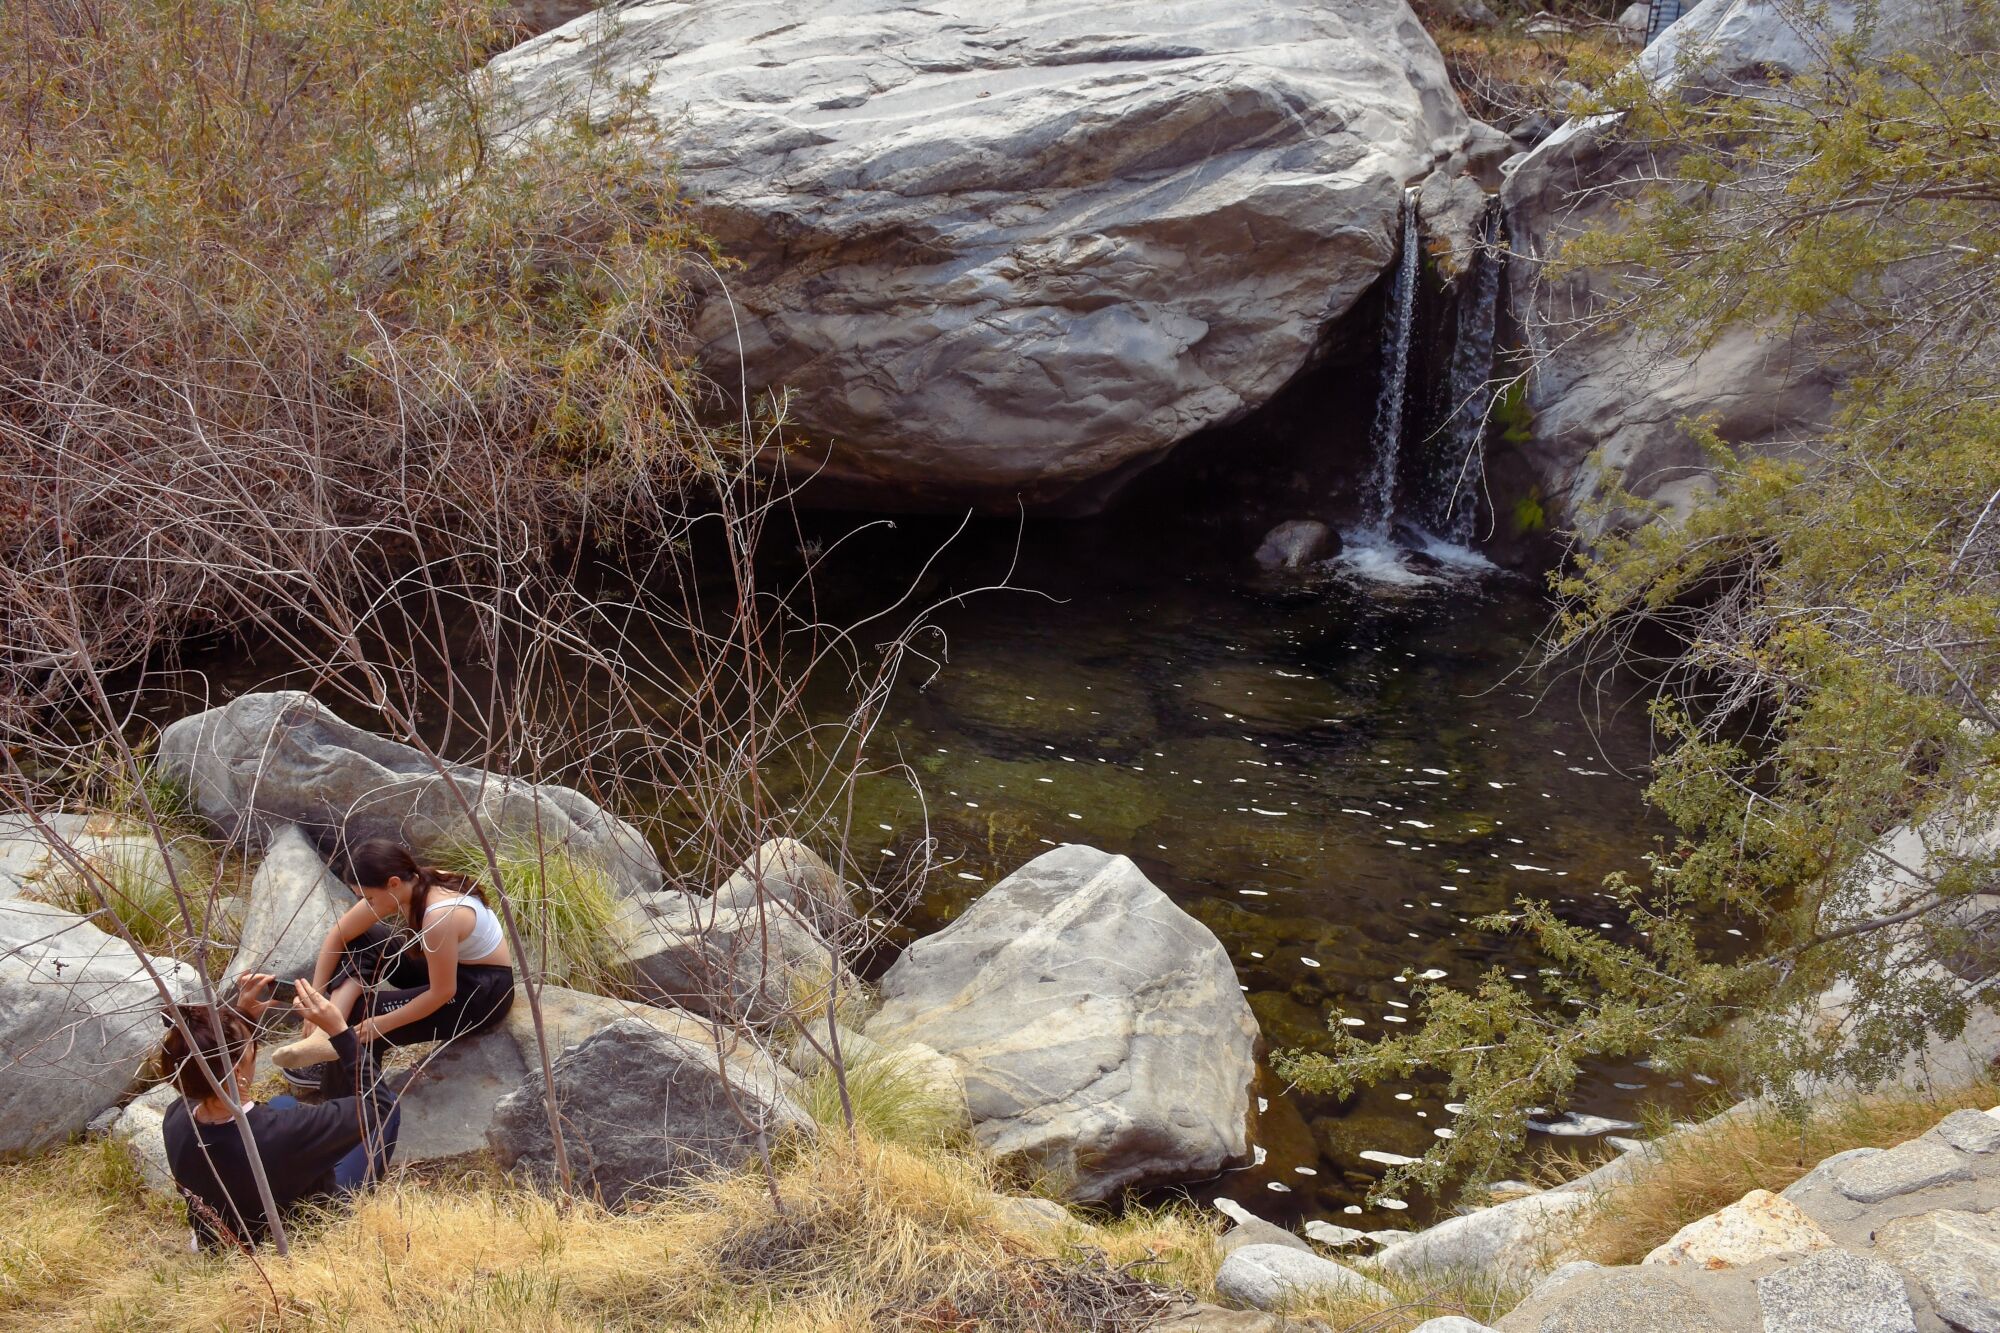 Two people sitting on rocks next to a pool of water and a waterfall